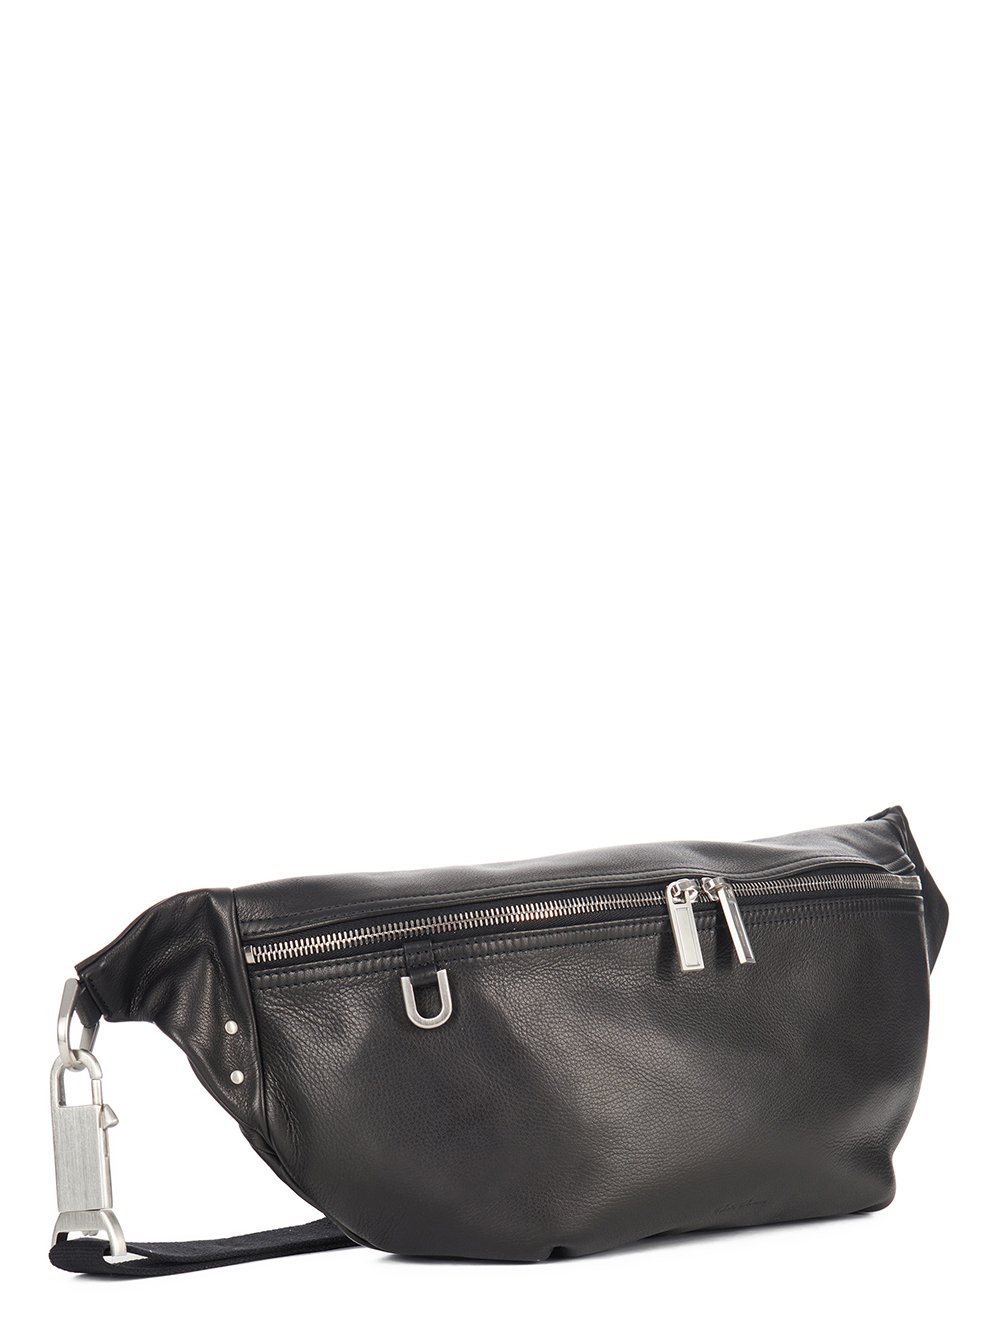 RICK OWENS FW23 LUXOR BUMBAG IN BLACK SOFT GRAIN COW LEATHER